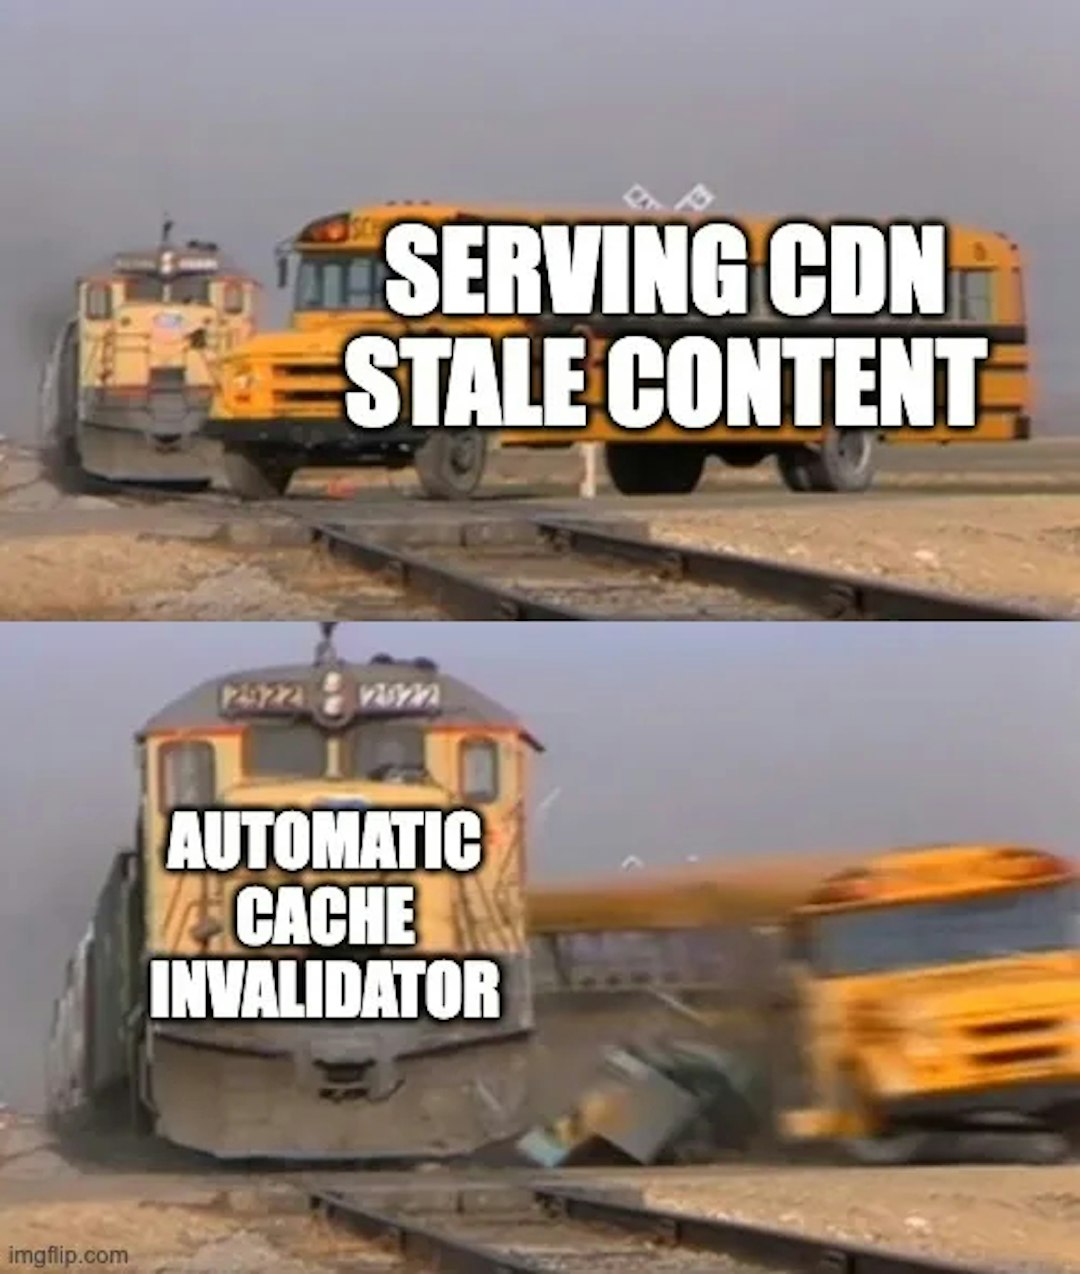 featured image - How to Automate CDN Cache Invalidation in Adobe Experience Manager